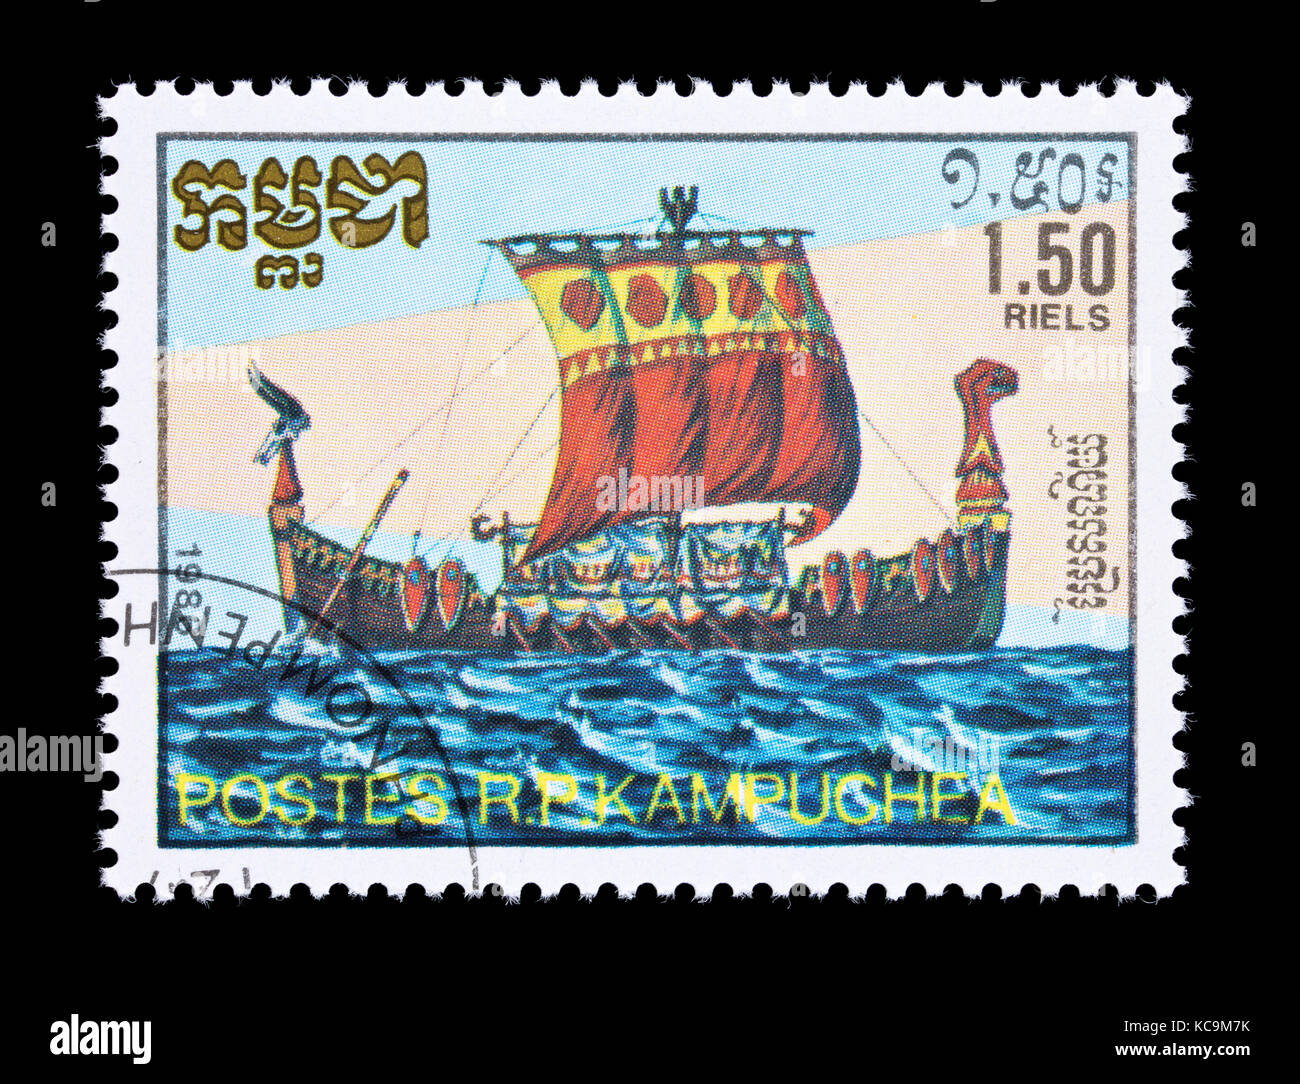 Postage stamp from Cambodia (Kampuchea) depicting a Viking long ship Stock Photo